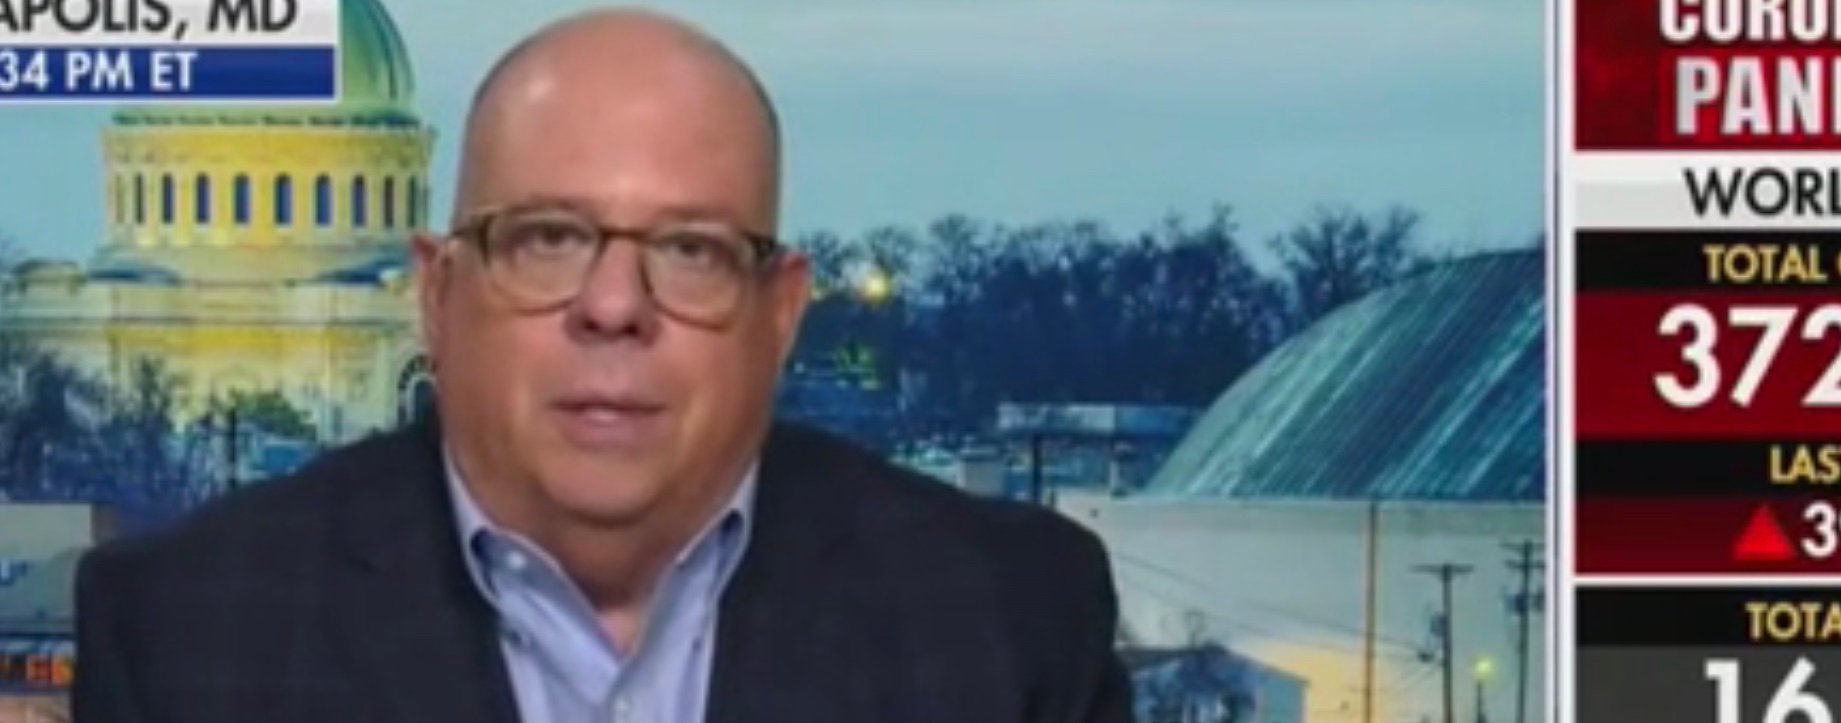 Republican Maryland Gov. Larry Hogan talks about the relationship between state governors and the Trump administration during the coronavirus crisis with Fox News, March 23, 2020. Fox News screenshot